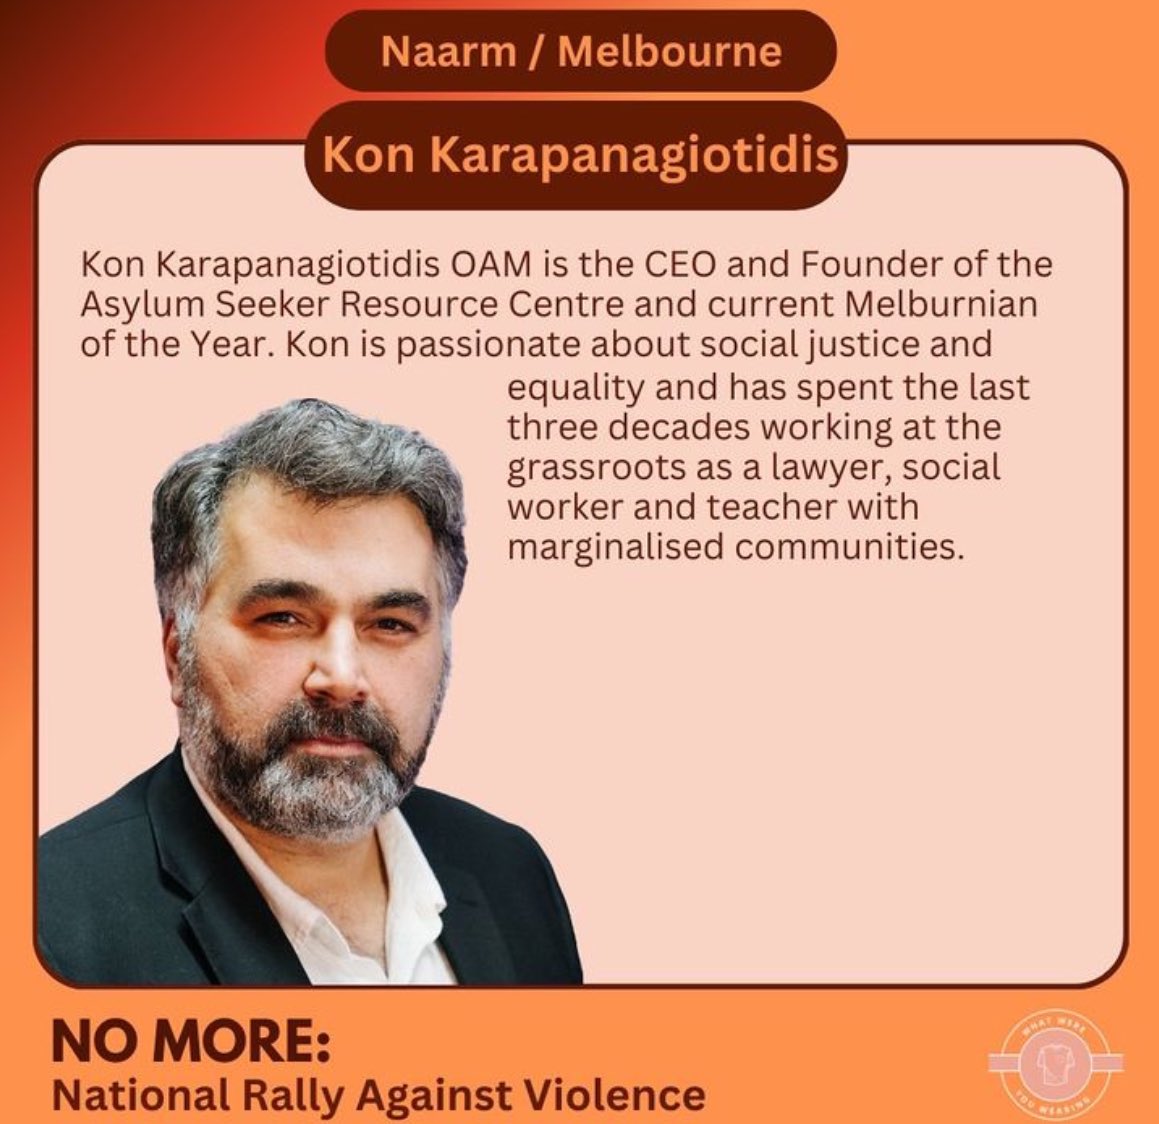 Honoured to be invited to speak tomorrow at Melbourne rally for an end to male violence against women. I said yes because this is a mens issue & we will not make the progress needed until men start being part of the solution instead of bystanders. See you 10am State Library.